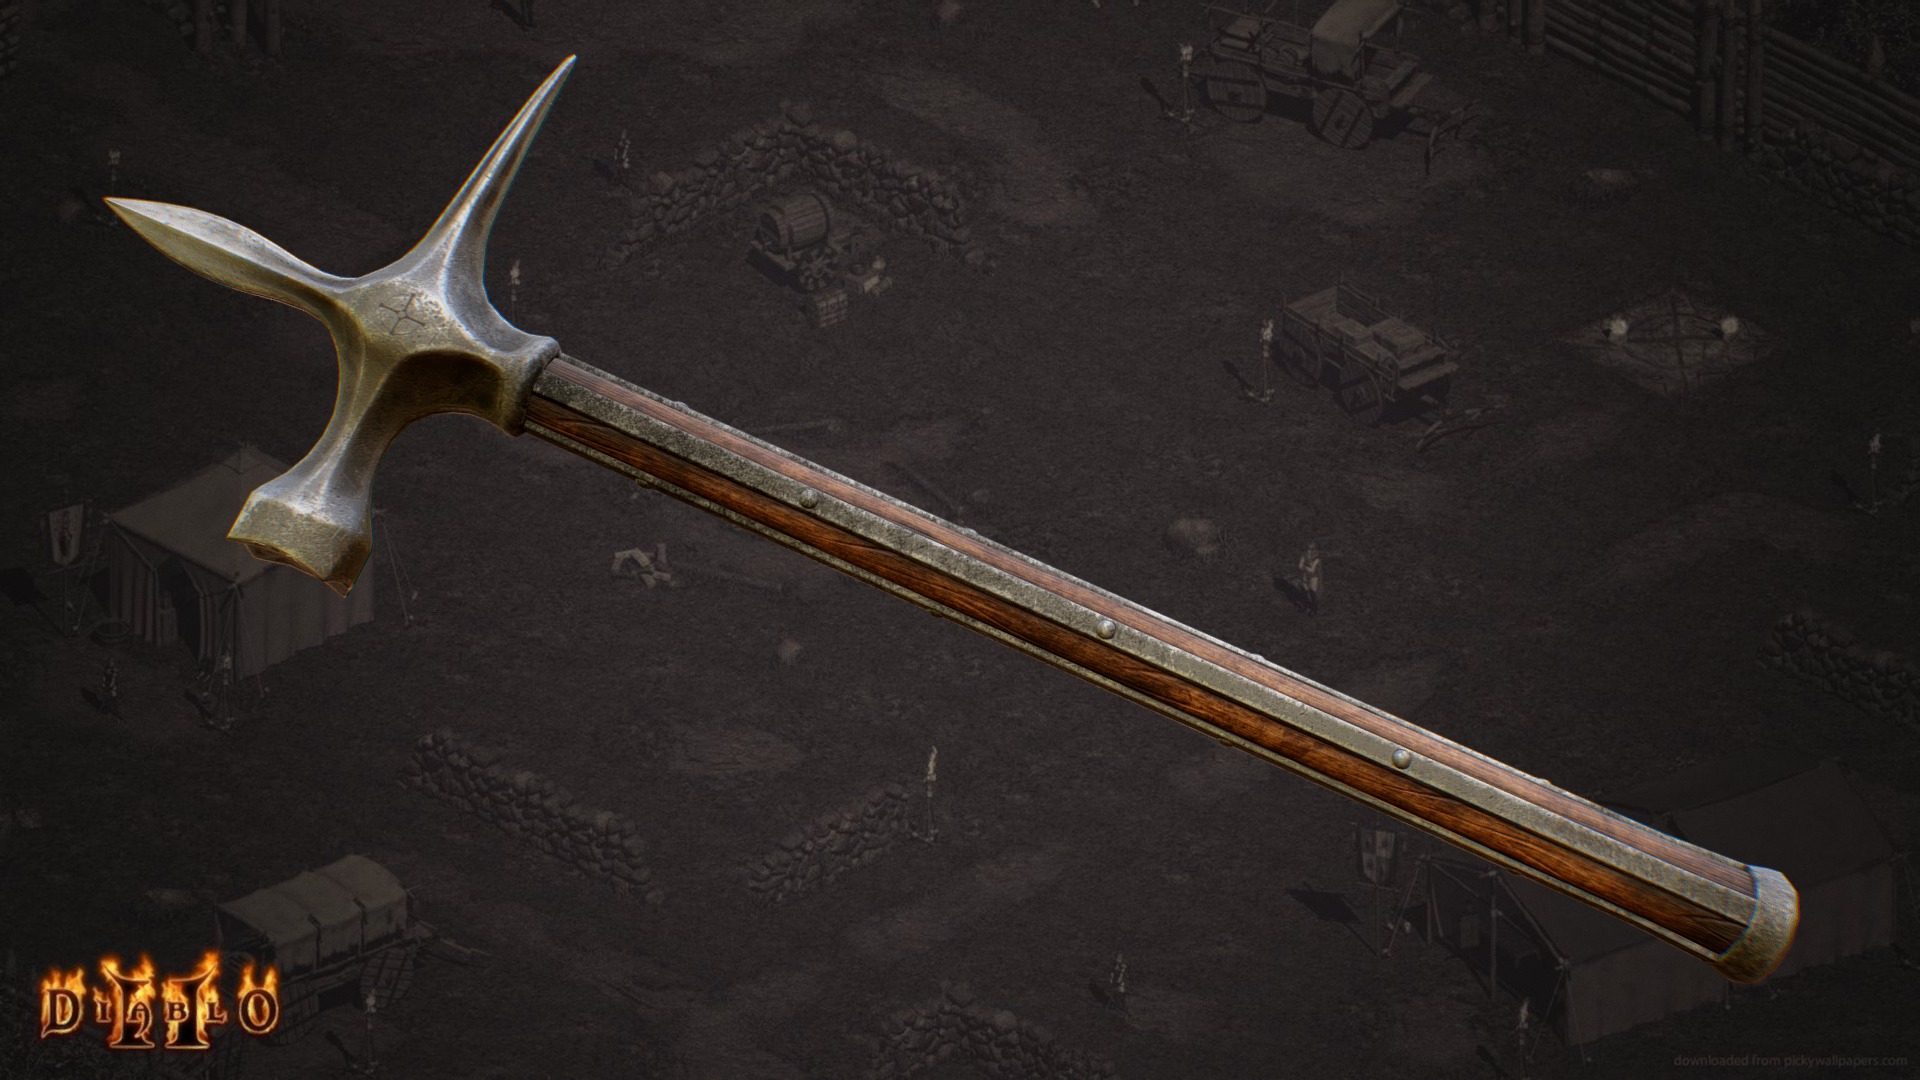 Weapon from diablo 2. I believe this one is quite true to the original. It's close enough to a real medieval warhammer that it could pass as a generic historical weapon as well.

What it looked like in game:



Modeled in Maya, textured in Substance Painter

Time: ~1 day - Warhammer - [ Diablo II ] - Download Free 3D model by Ole Gunnar Isager (@FrenchBaguette) 3d model